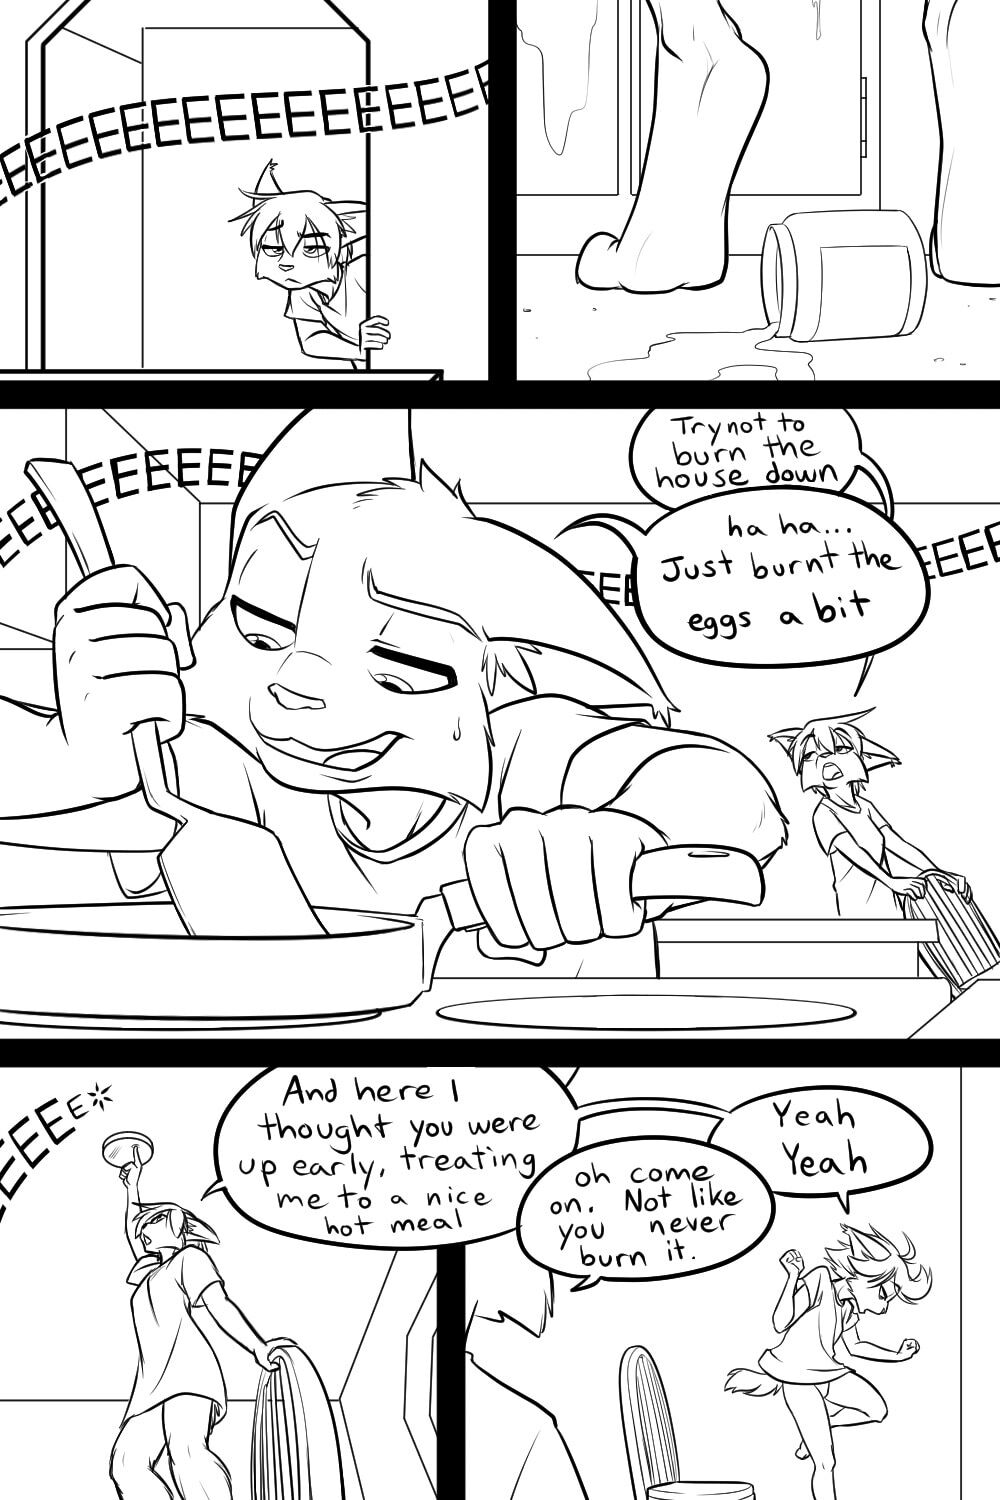 Thursday Mornings - Page 4